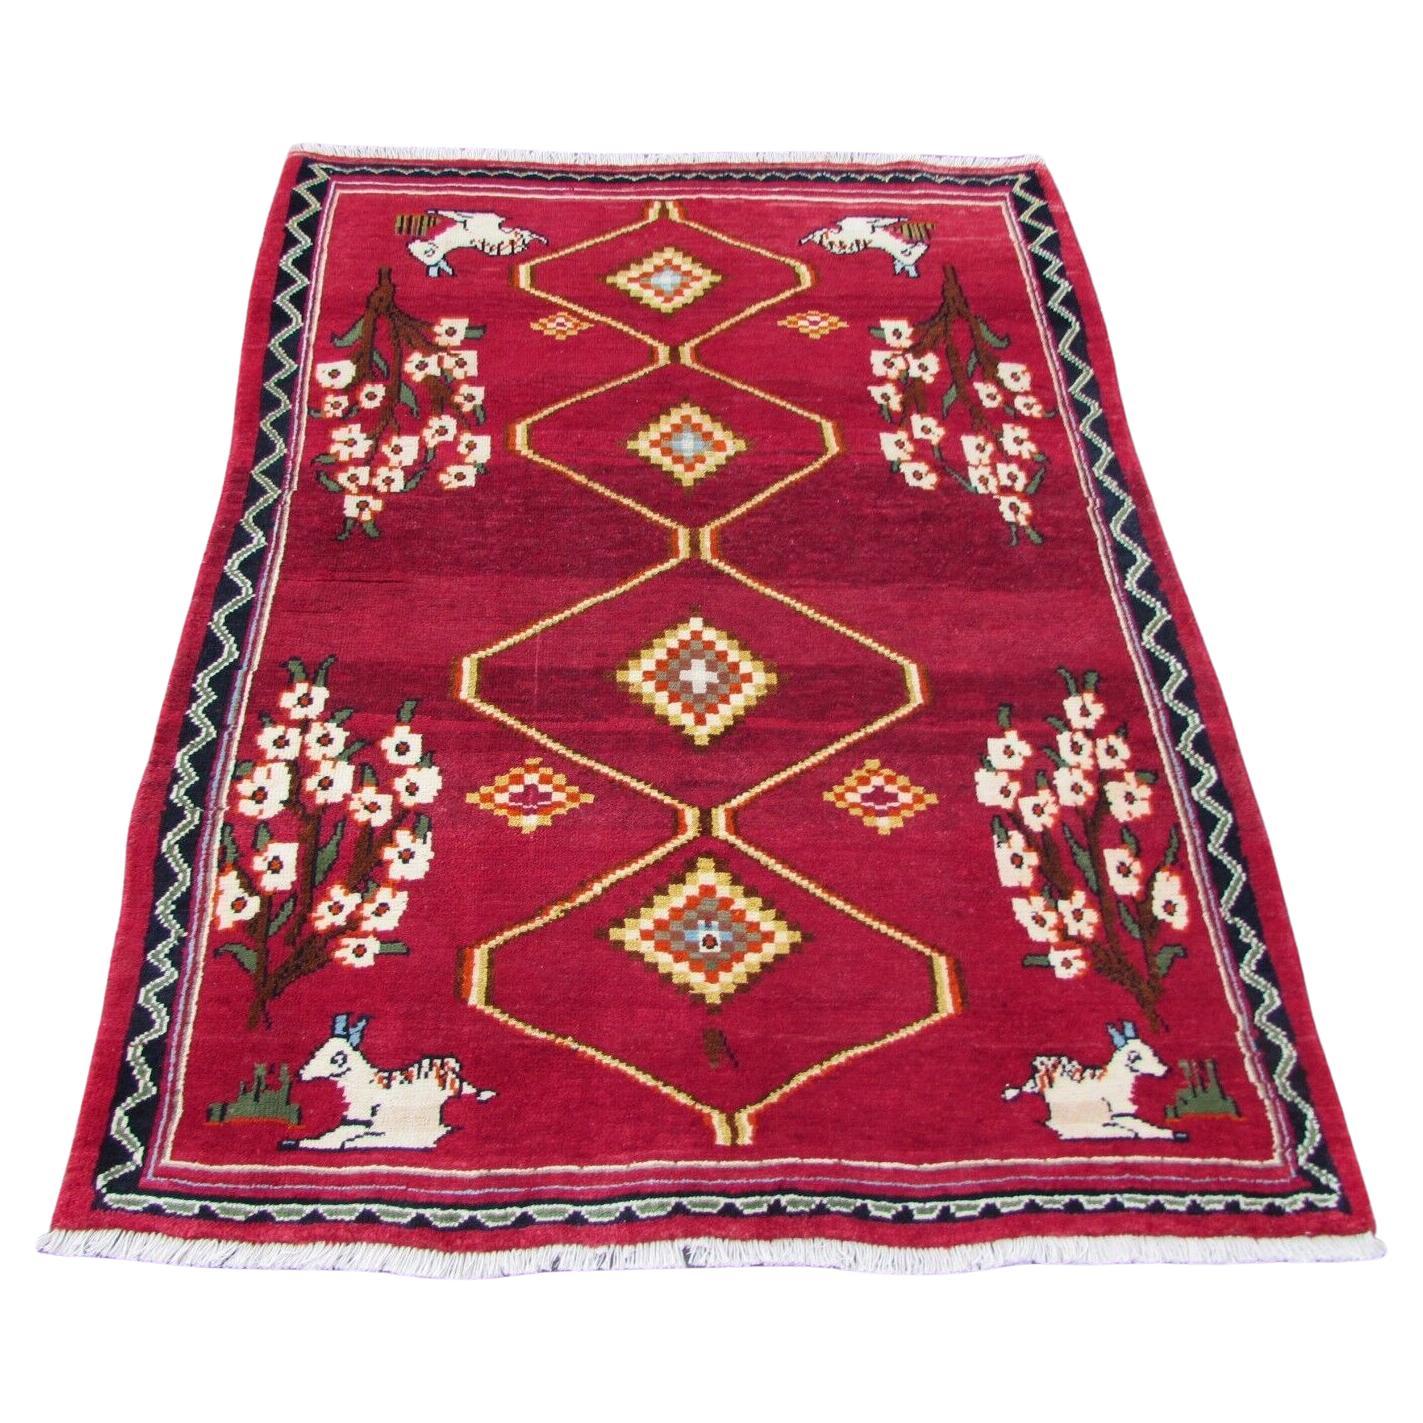 Handmade Vintage Persian Style Gabbeh Red Rug 4.1' x 5.3', 1970s, 1Q60 For Sale